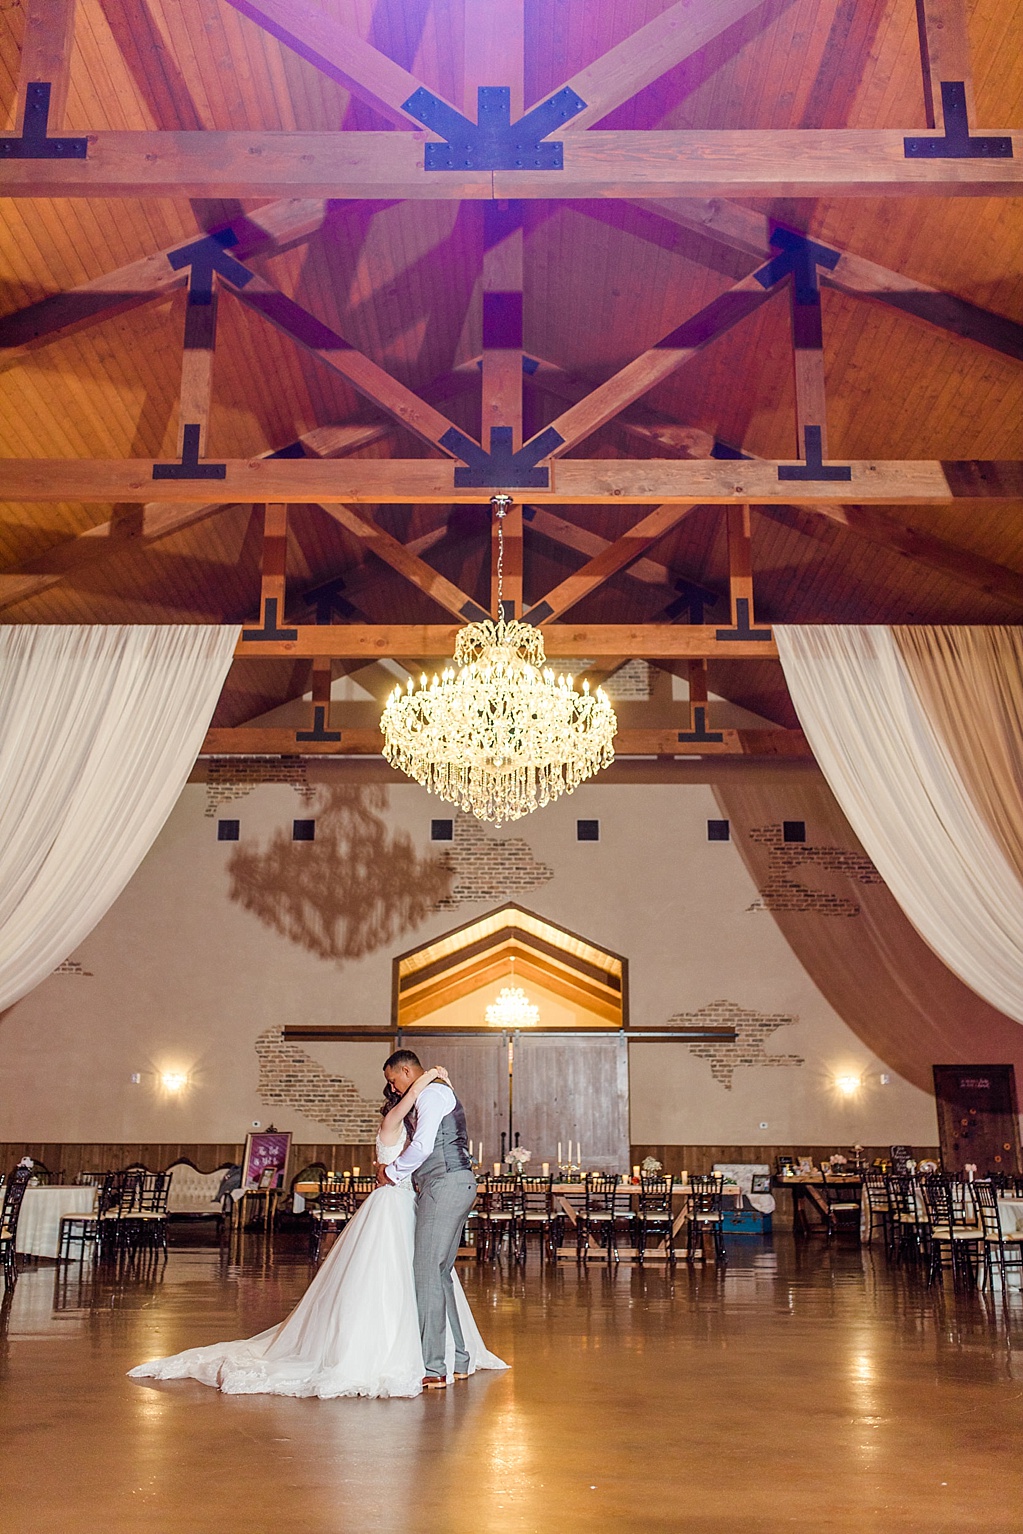 A Blush Vintage Summer Wedding at The Chandelier of Gruene in New Braunfels Texas by Allison Jeffers Photography 0159